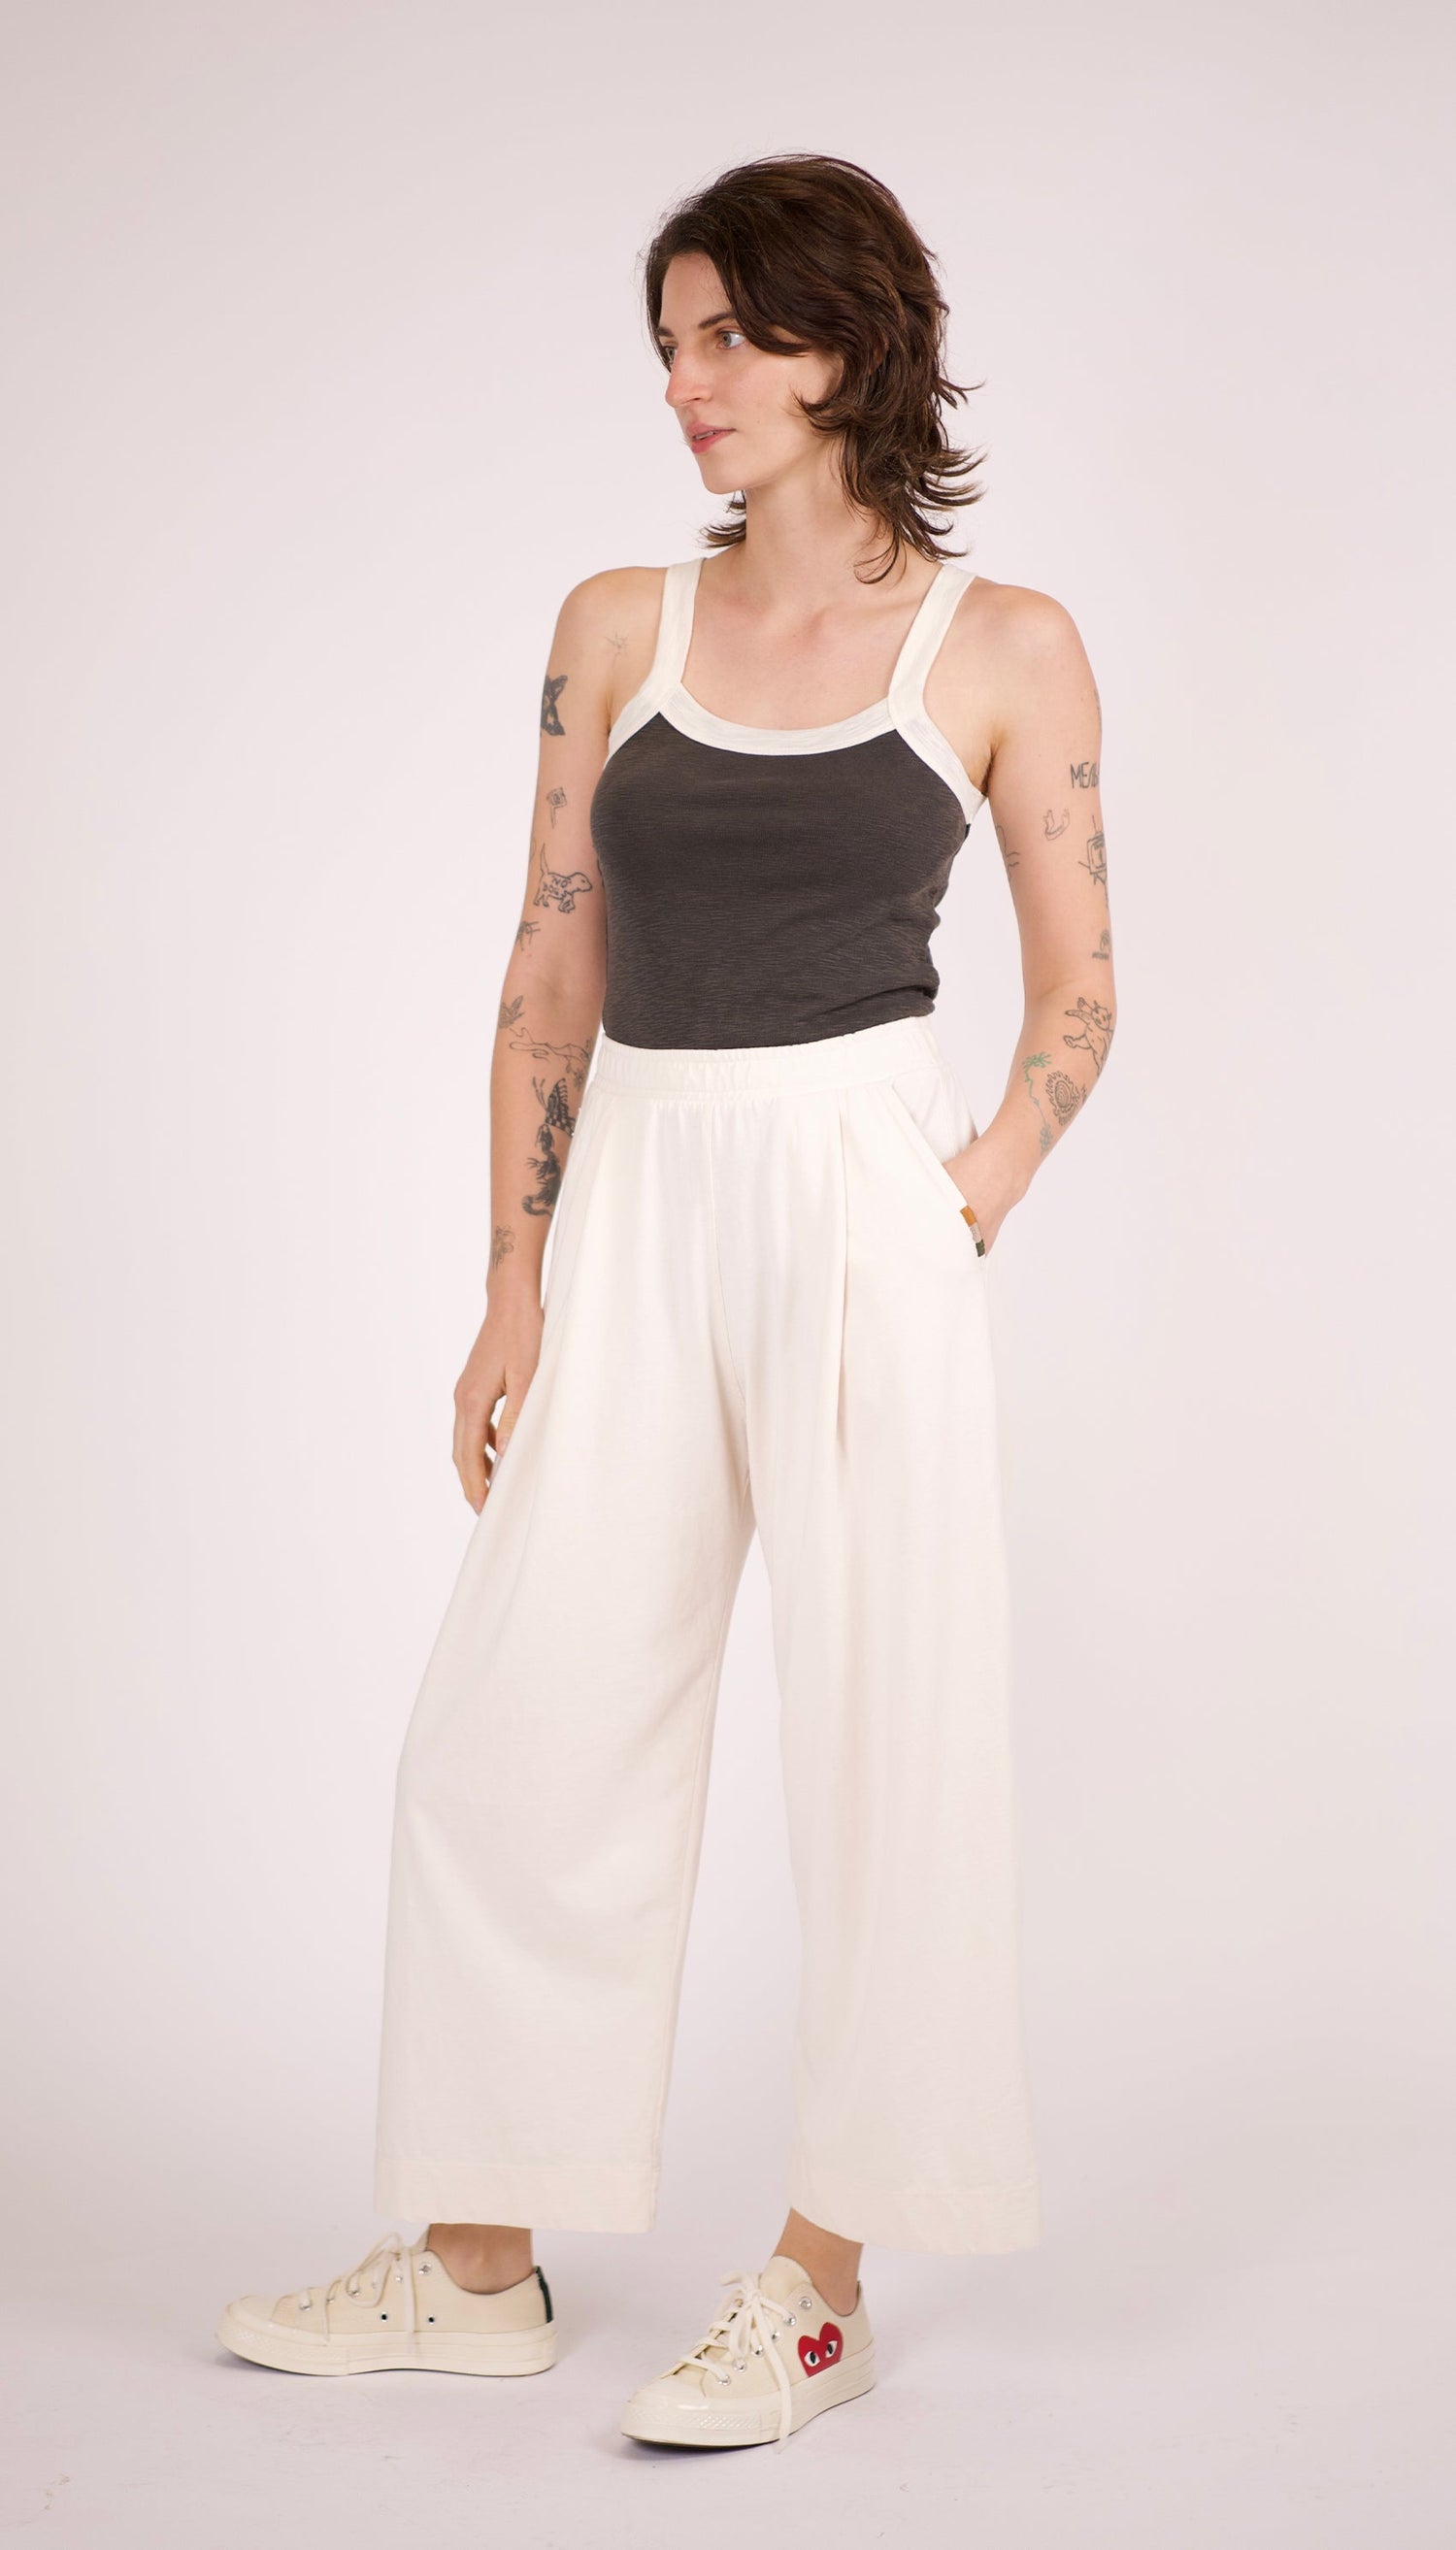 Slip-on wide-leg jersey slacks, elastic waistband, comfy yet chic! Made with 100% Organic Cotton Jersey.